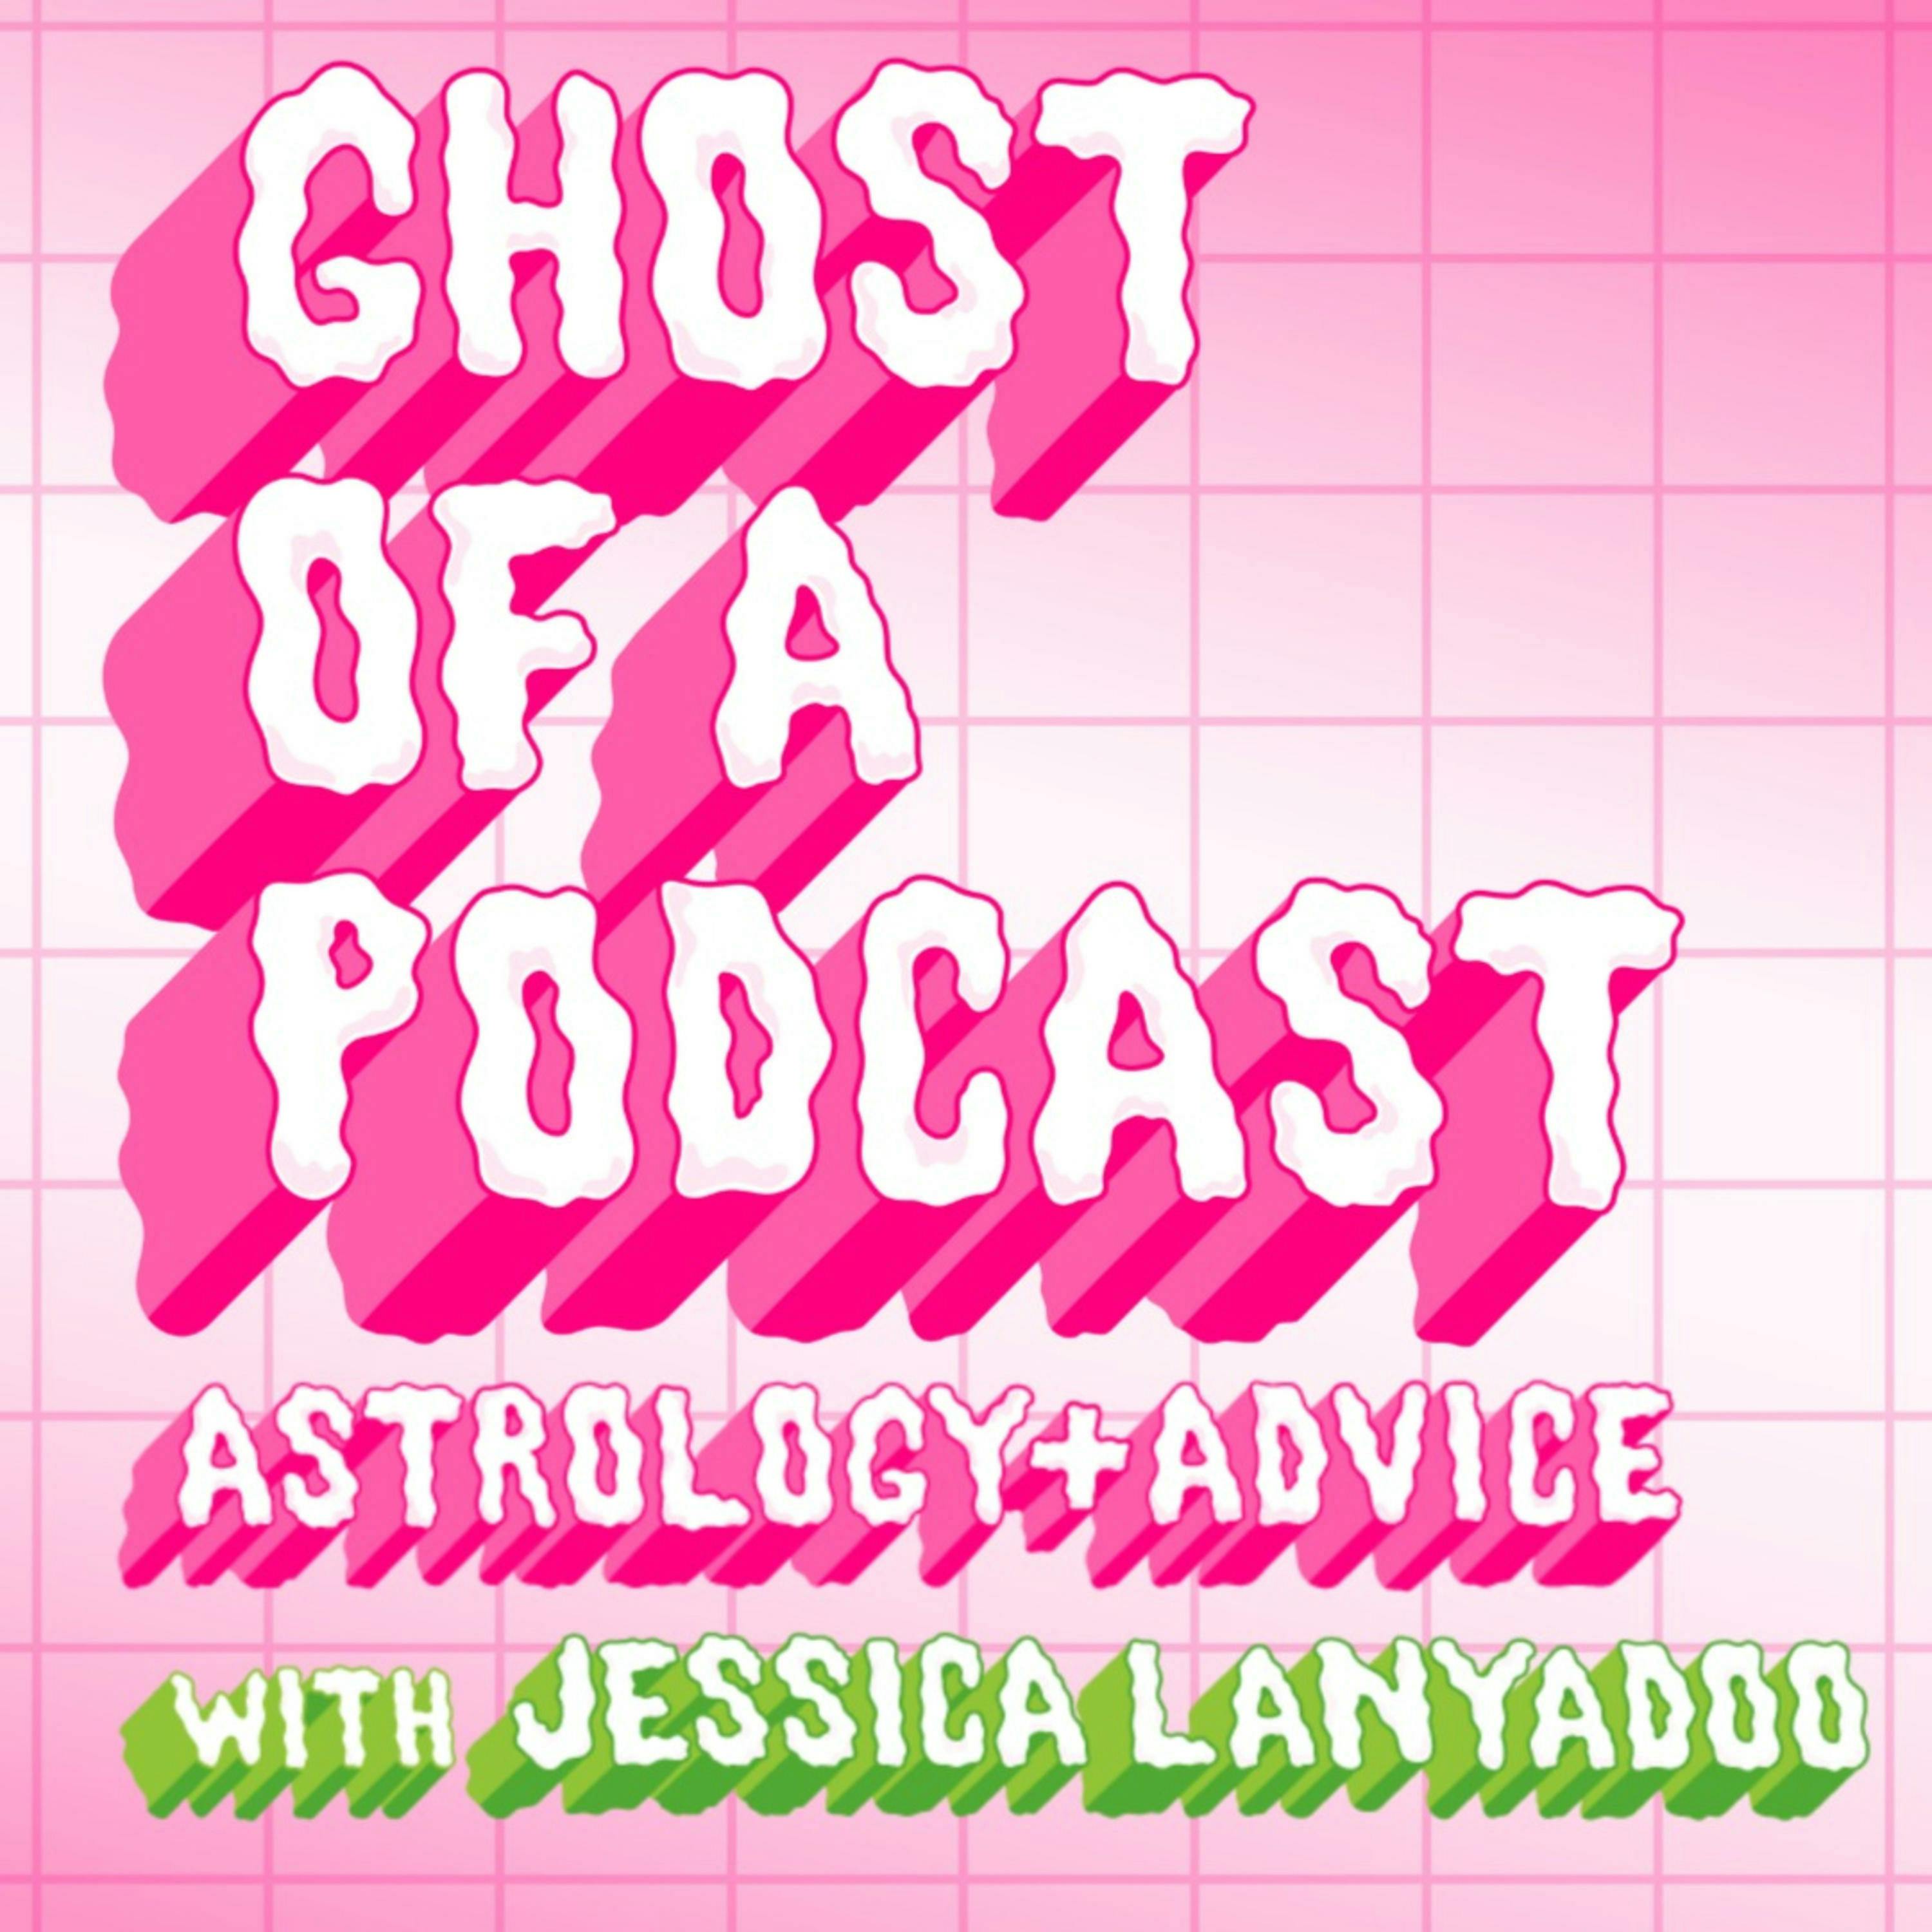 191: Mental Or Psychic? + Astrology